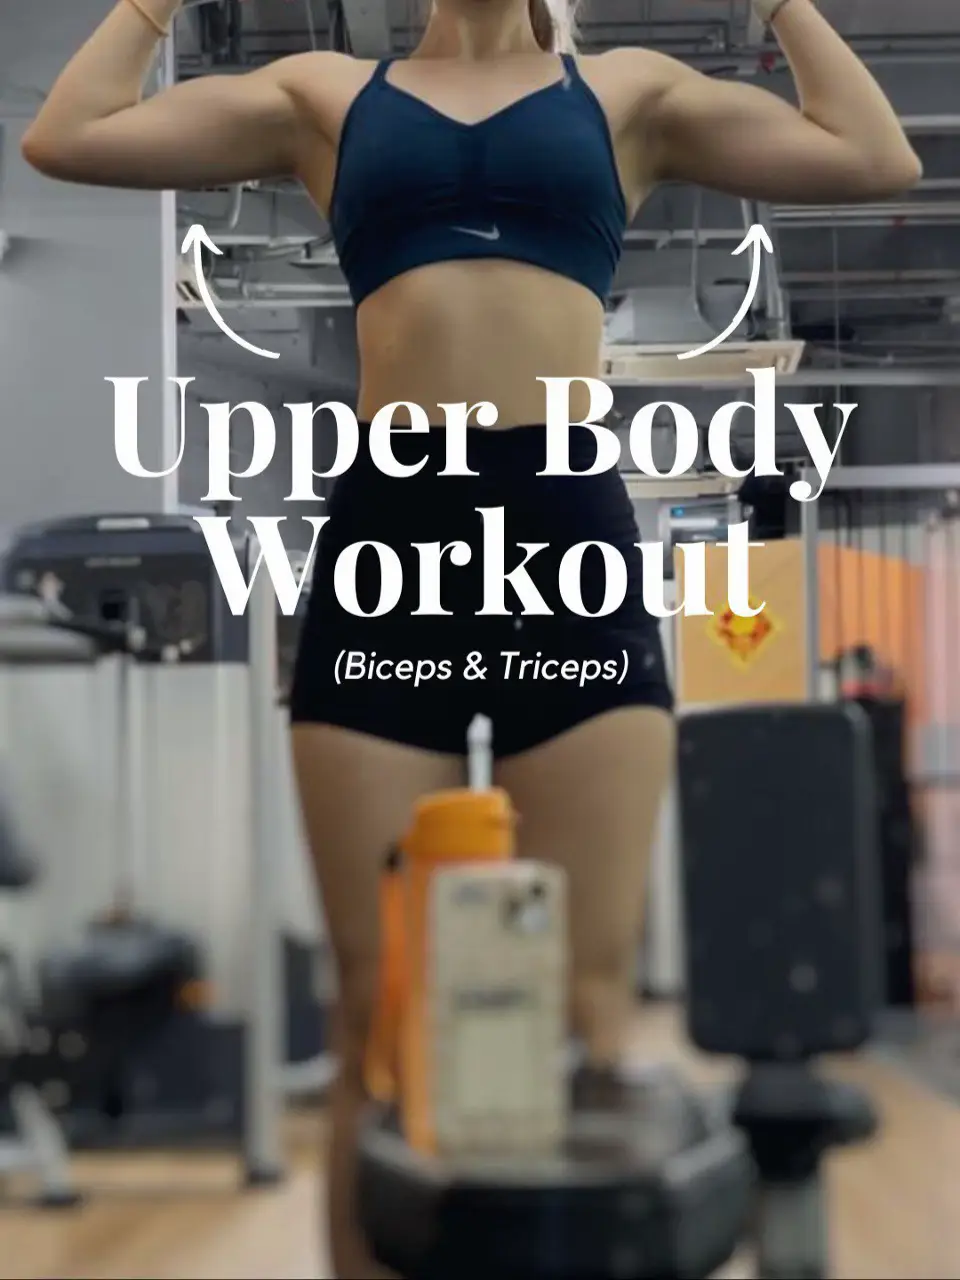 Easy Upper Body Workout Routine for Beginners!💪🏽, Video published by RAU